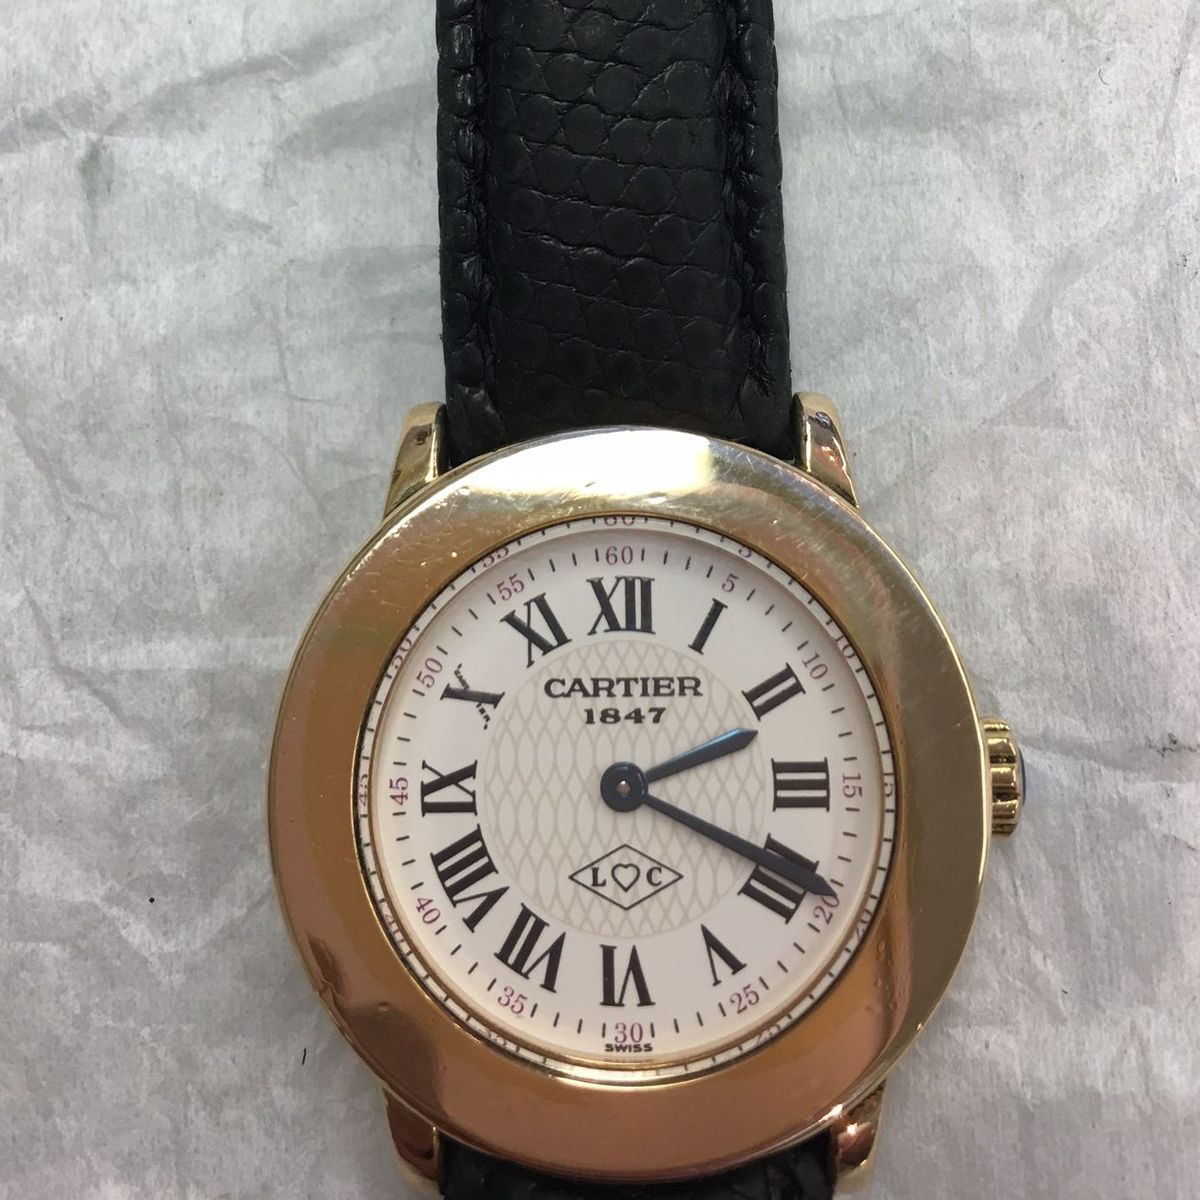 We are Cartier watch repair watchmakers and we can repair your watch!